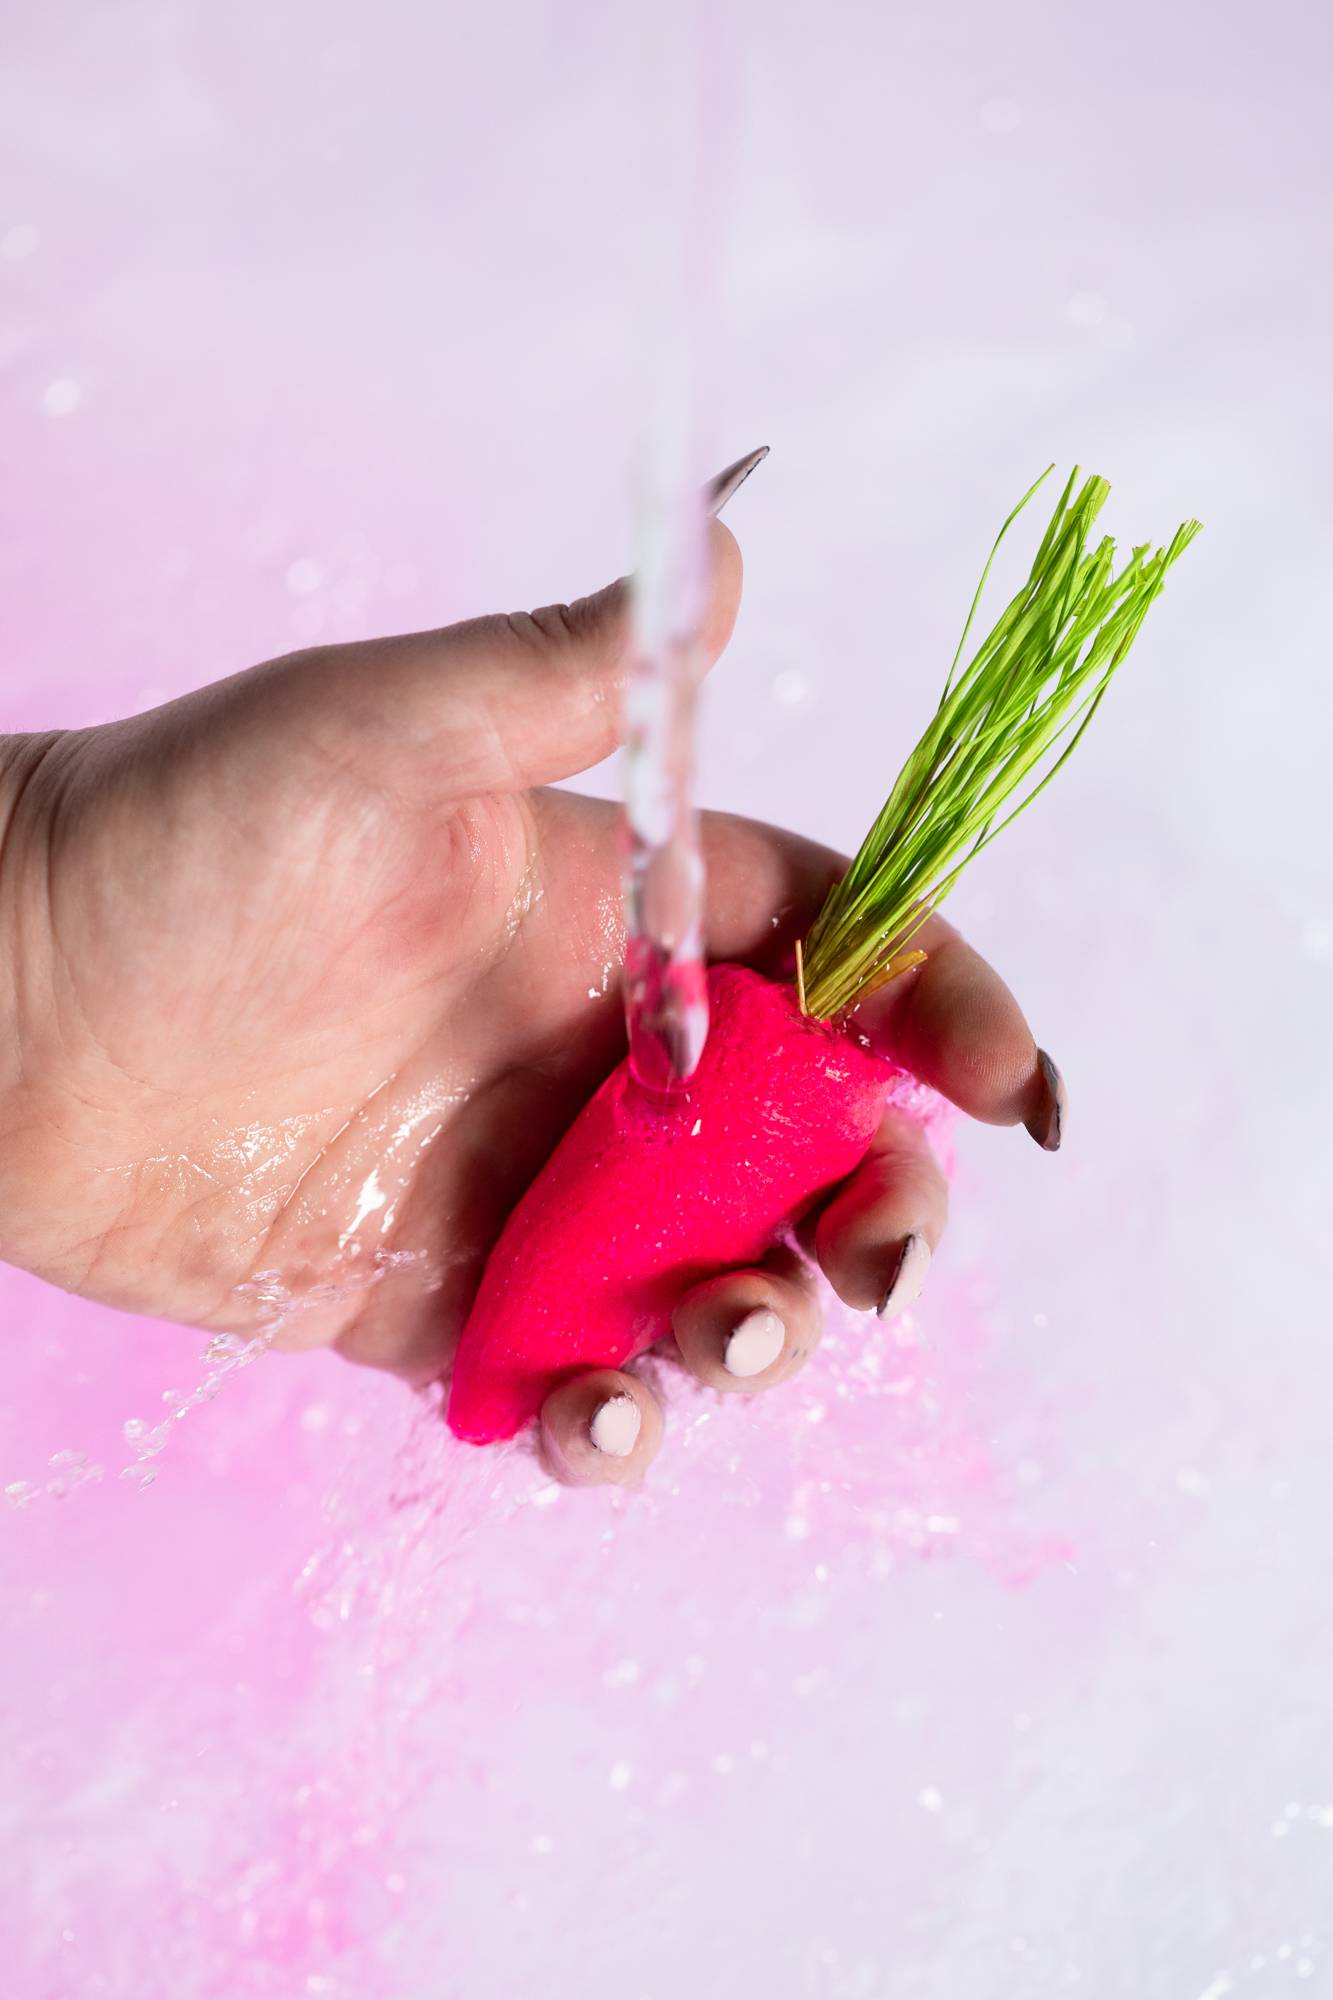 A close-up image of the model's hand holding the pink carrot bubble bar under running water creates a deep pink, bubbly bath. 